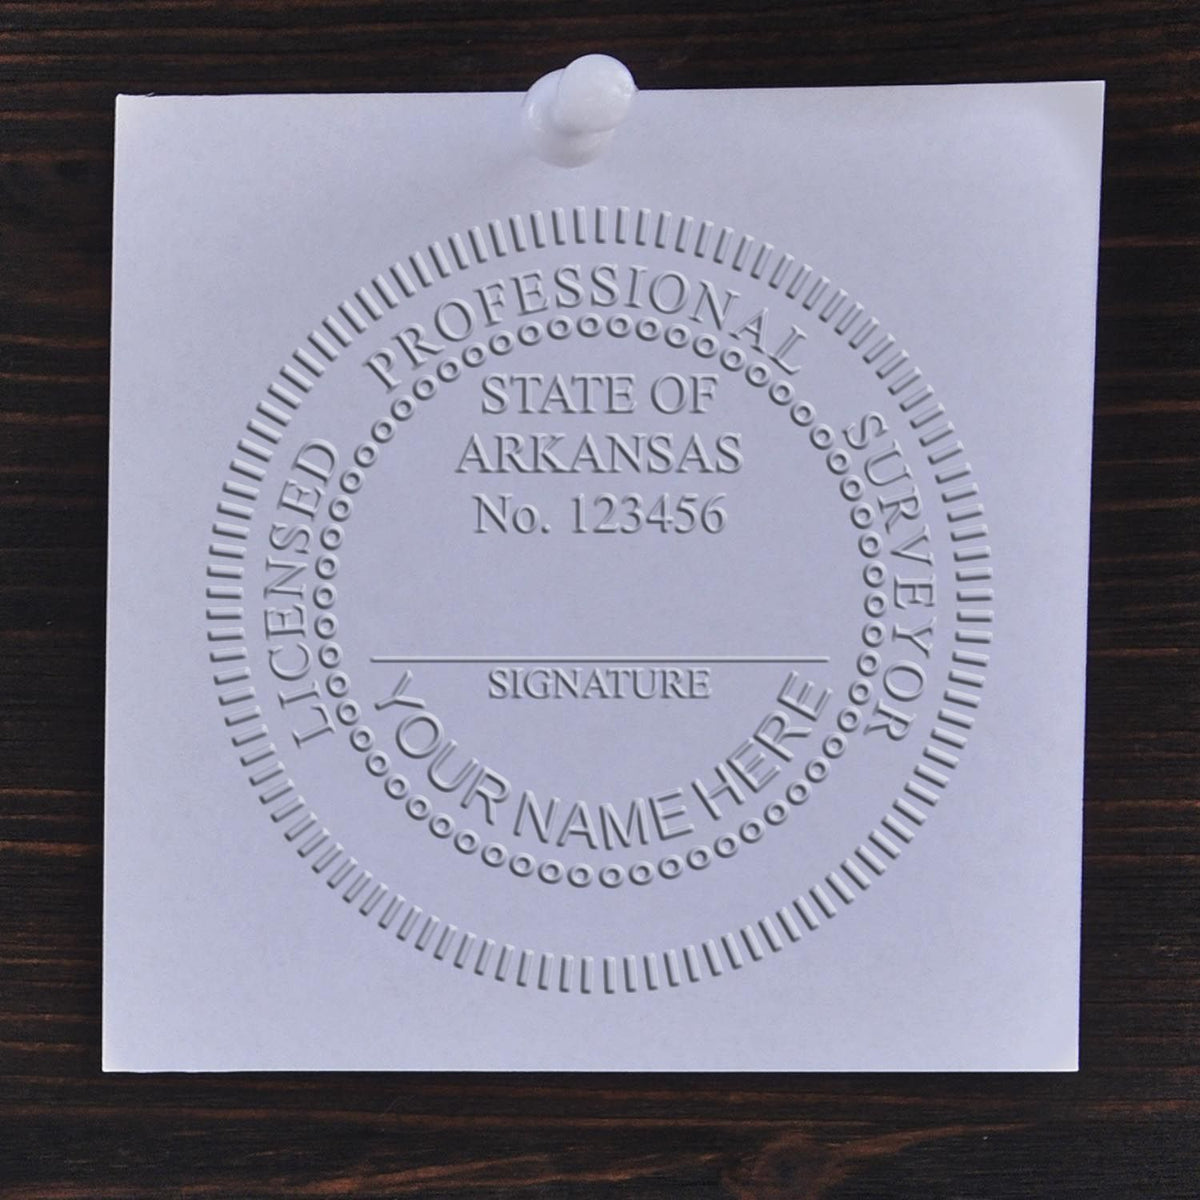 The Long Reach Arkansas Land Surveyor Seal stamp impression comes to life with a crisp, detailed photo on paper - showcasing true professional quality.